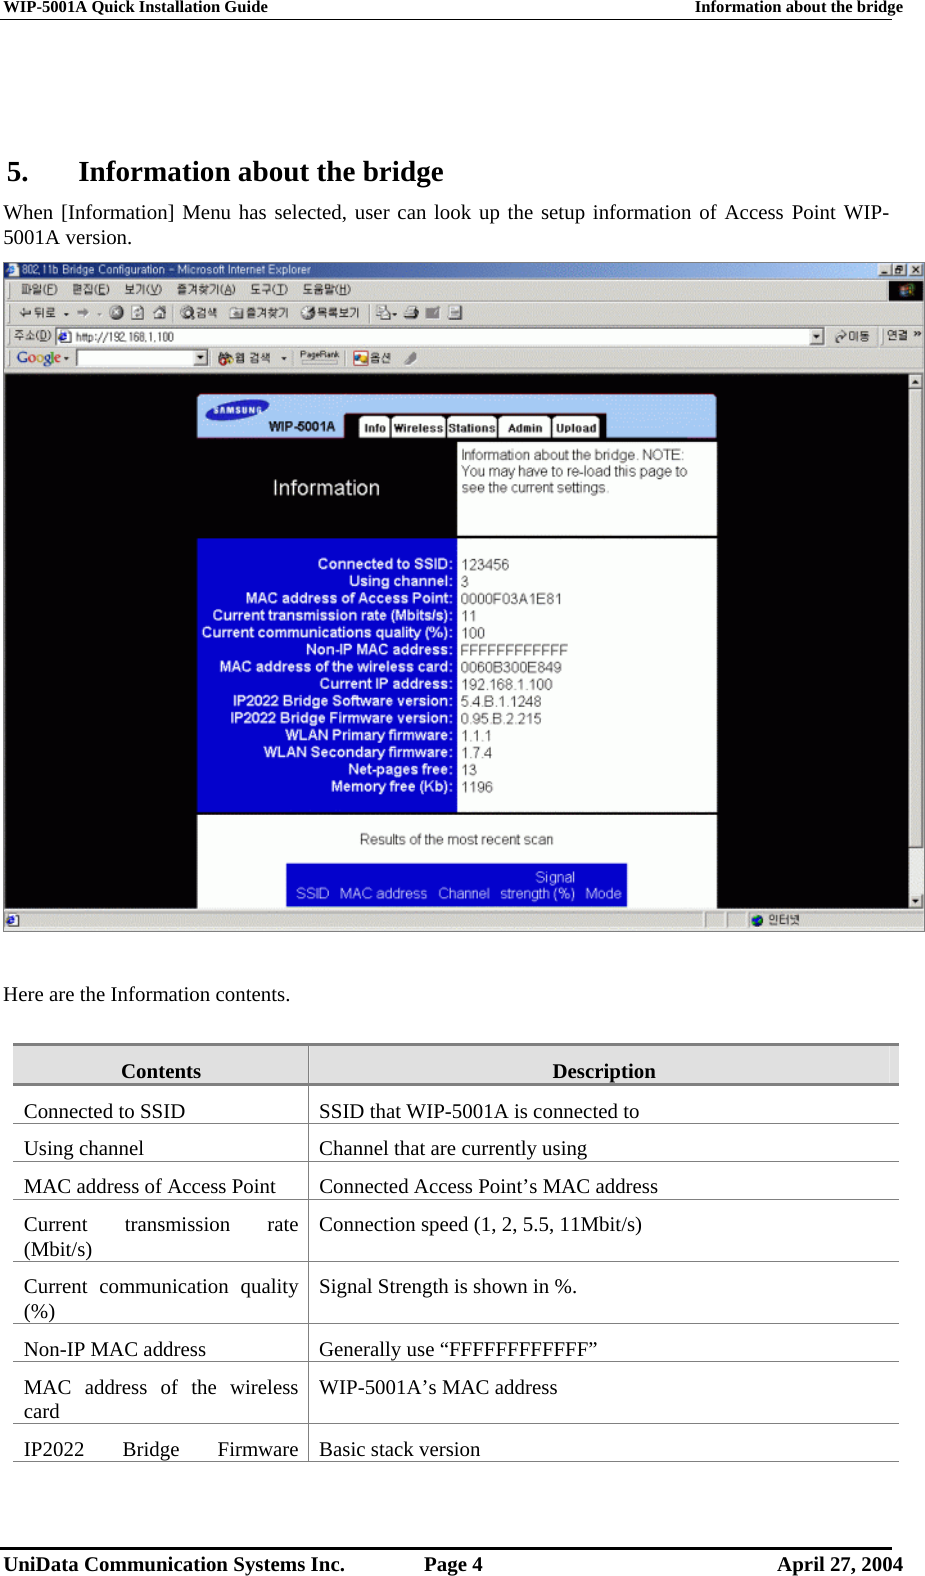 WIP-5001A Quick Installation Guide  Information about the bridge UniData Communication Systems Inc.  Page 4  April 27, 2004 5.  Information about the bridge When [Information] Menu has selected, user can look up the setup information of Access Point WIP-5001A version.   Here are the Information contents.  Contents  Description Connected to SSID  SSID that WIP-5001A is connected to Using channel  Channel that are currently using MAC address of Access Point  Connected Access Point’s MAC address Current transmission rate (Mbit/s)  Connection speed (1, 2, 5.5, 11Mbit/s) Current communication quality (%)  Signal Strength is shown in %. Non-IP MAC address  Generally use “FFFFFFFFFFFF” MAC address of the wireless card  WIP-5001A’s MAC address IP2022 Bridge  Firmware  Basic stack version 